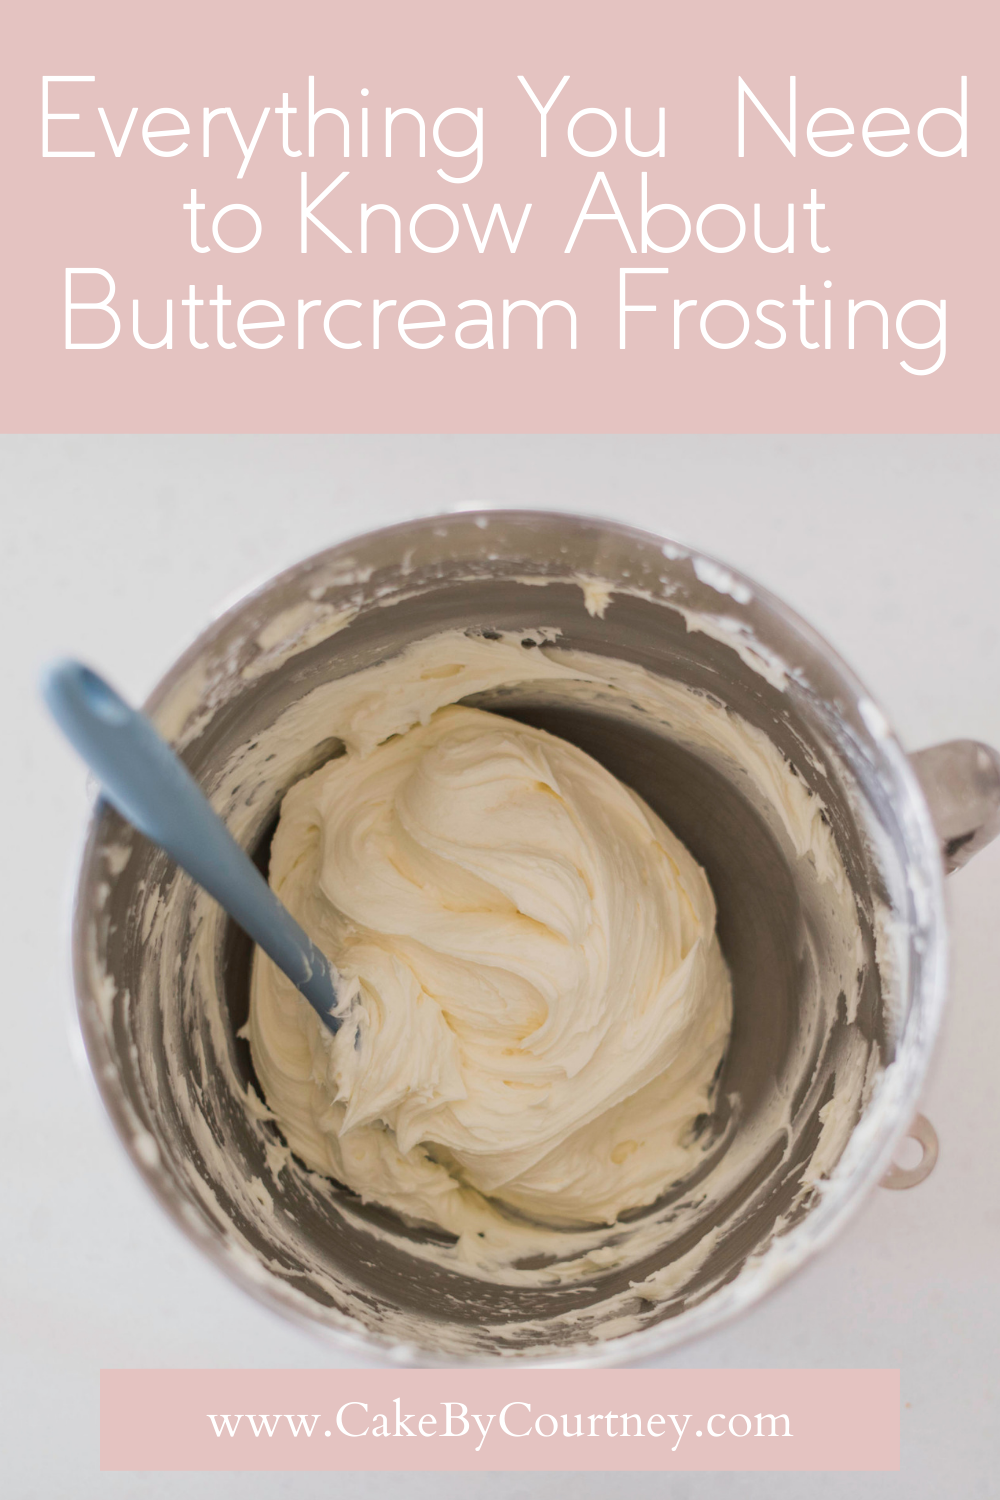 Check out these tips on how to make amazing buttercream frosting designs for cakes. www.cakebycourtney.com